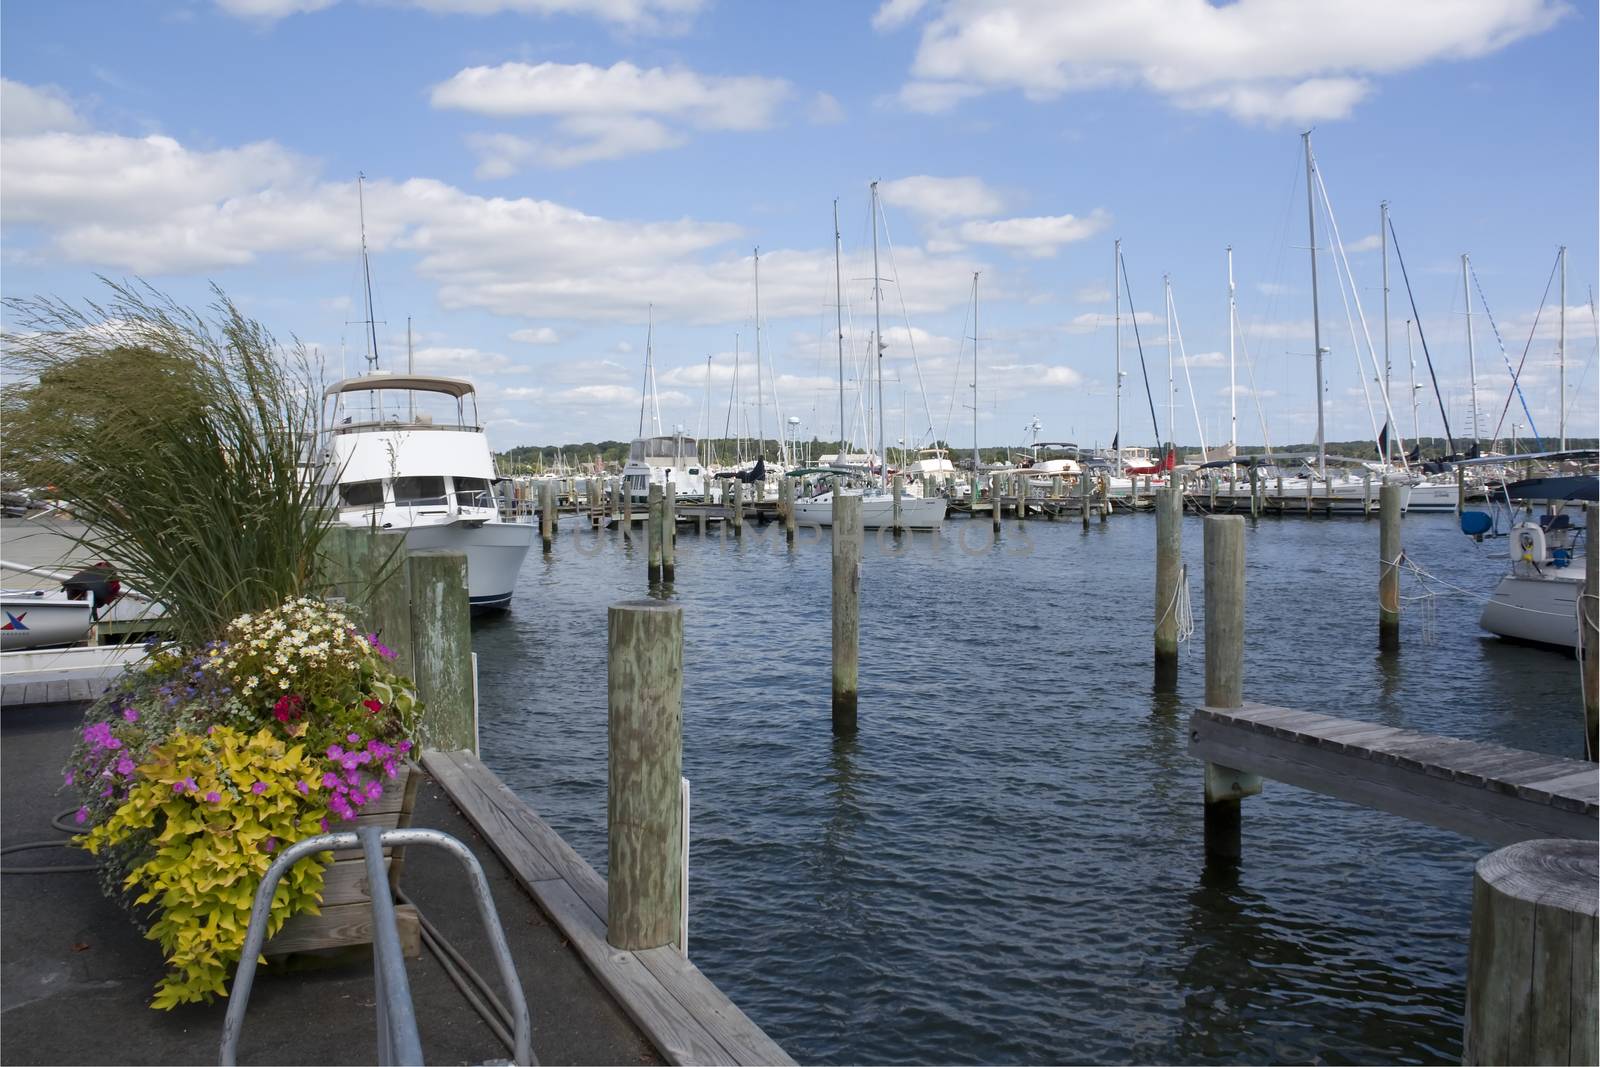 Boats and yacht docked in Mystic Connecticut Marina USA